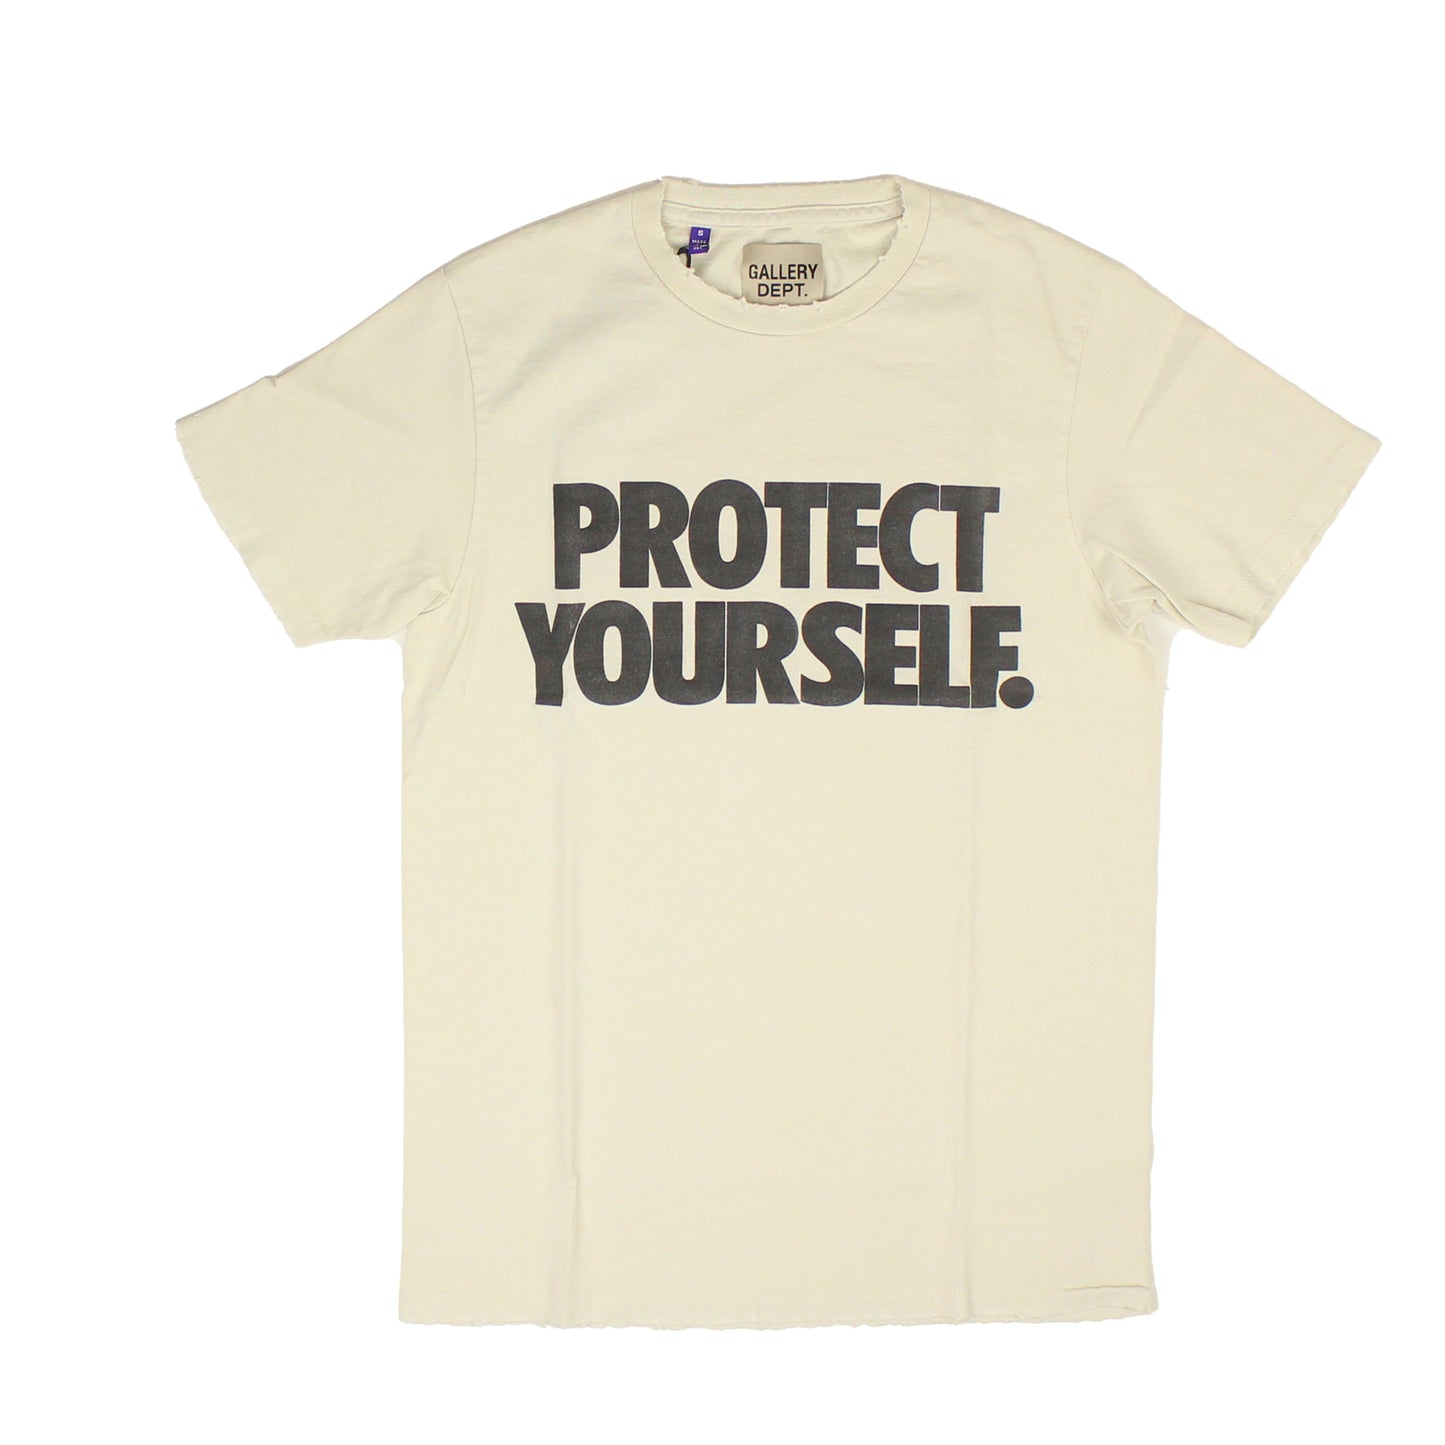 Gallery Dept. Protect Yourself T-Shirt - Off-White